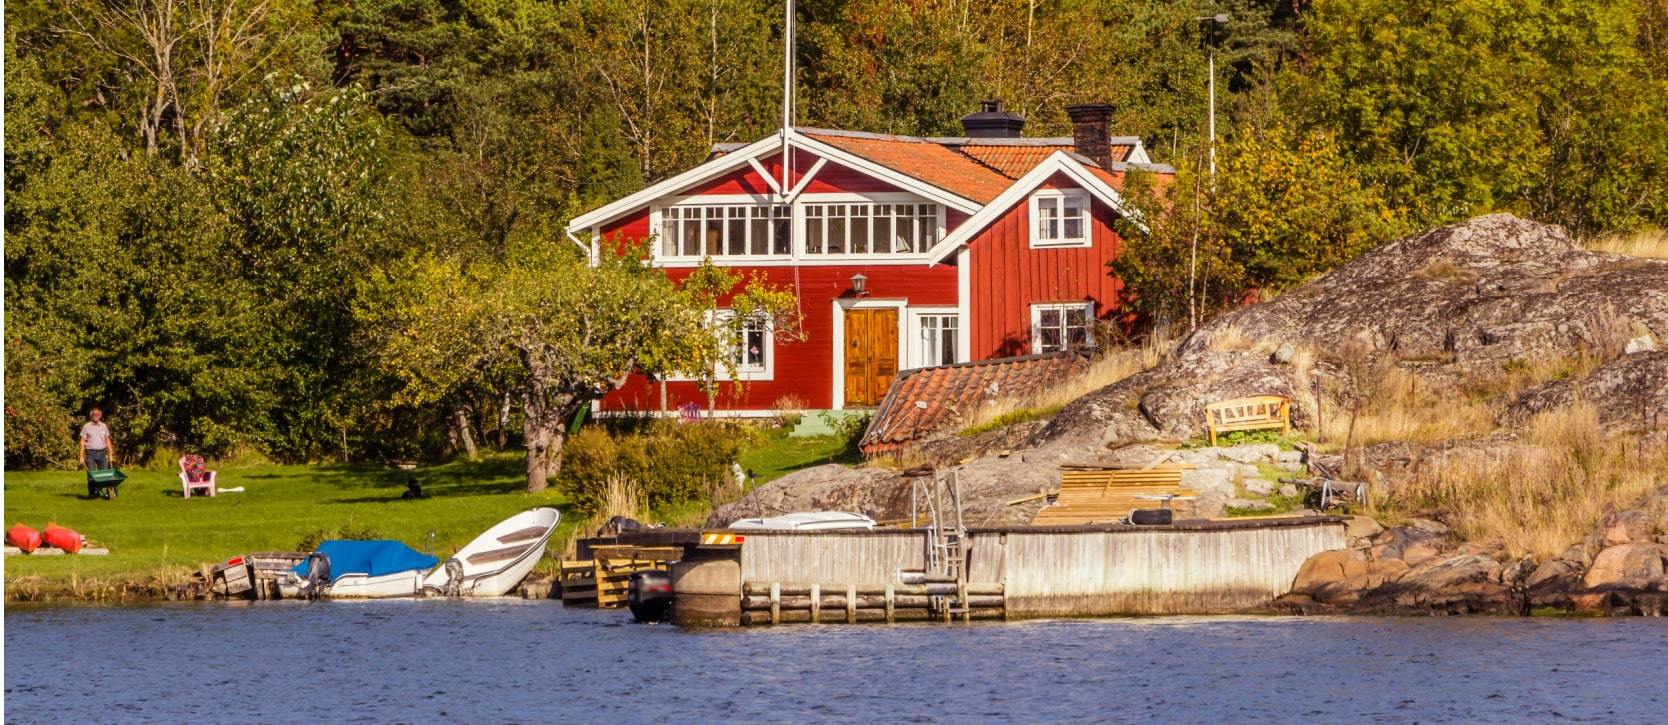 Red cottage sitting on the water's edge of a lake